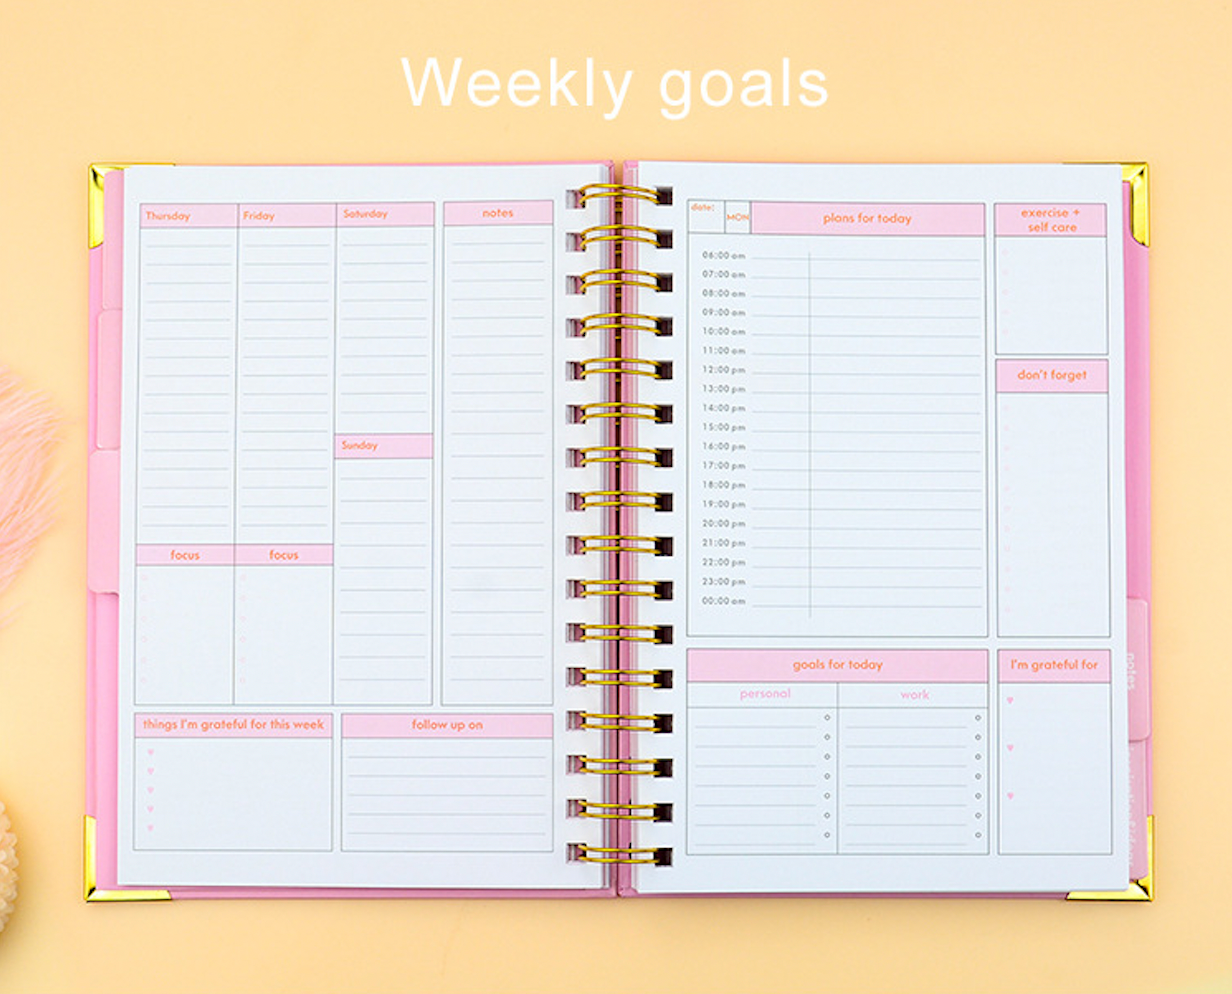 A5 Binding Goal Setting Planner with Template